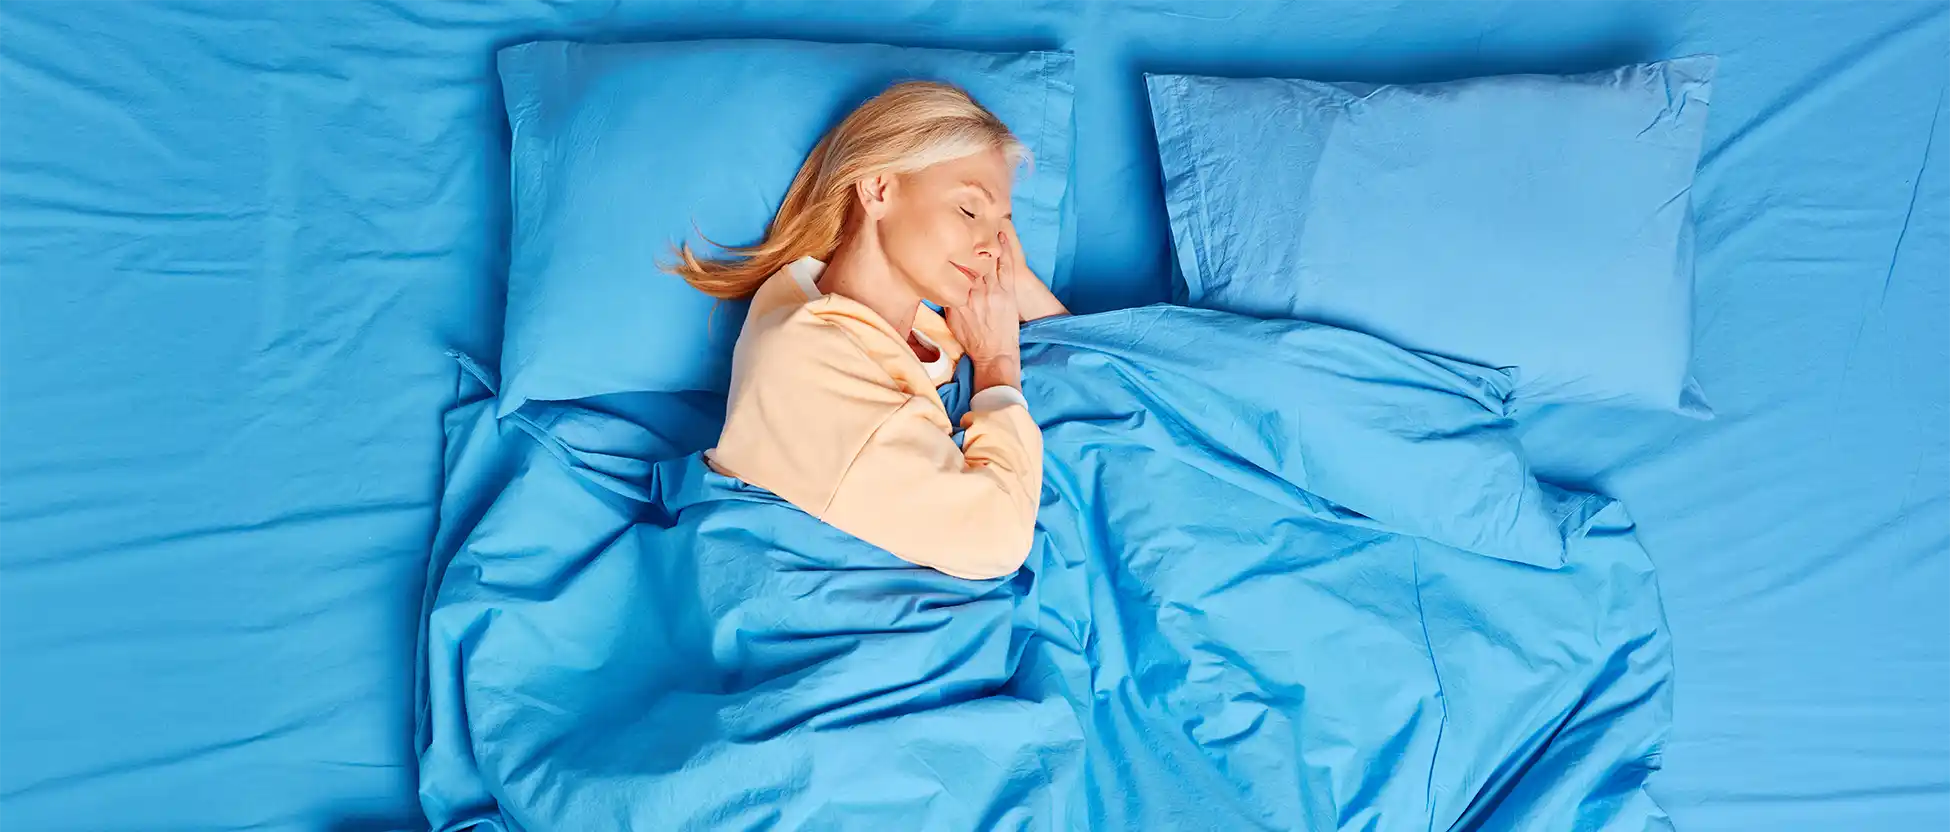 Introducing MenoBliss: Your Ultimate Sleep Companion During Menopause